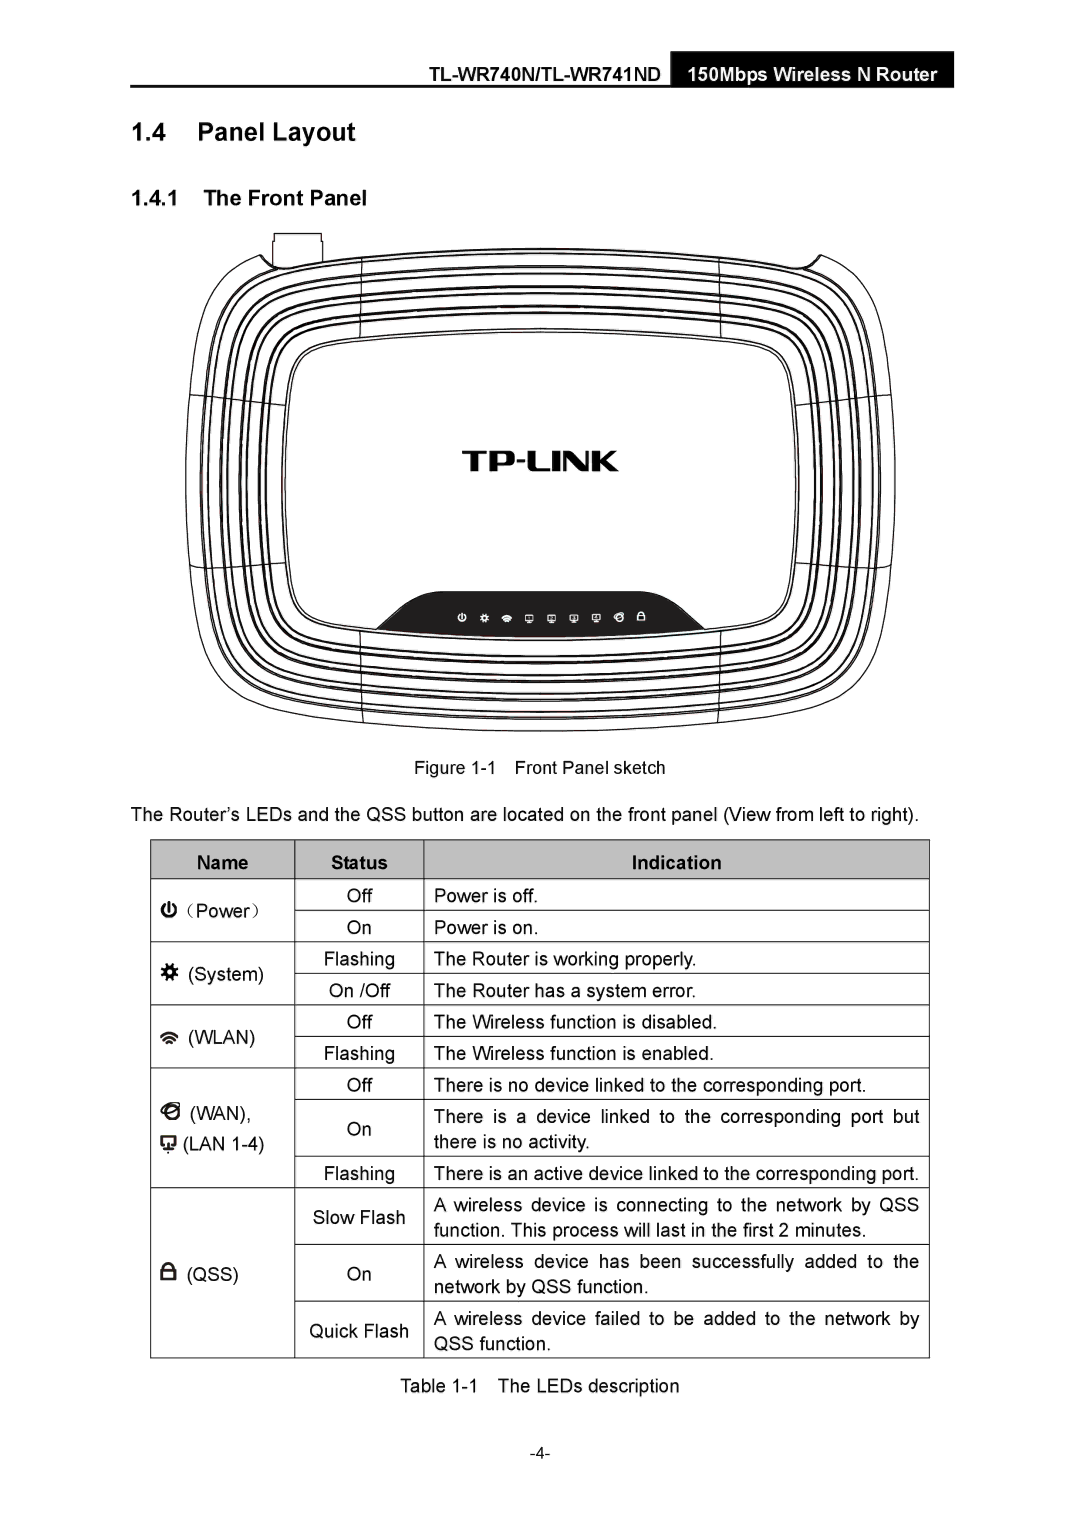 TP-Link TL-WR741ND manual Panel Layout, Front Panel, Name Status Indication 